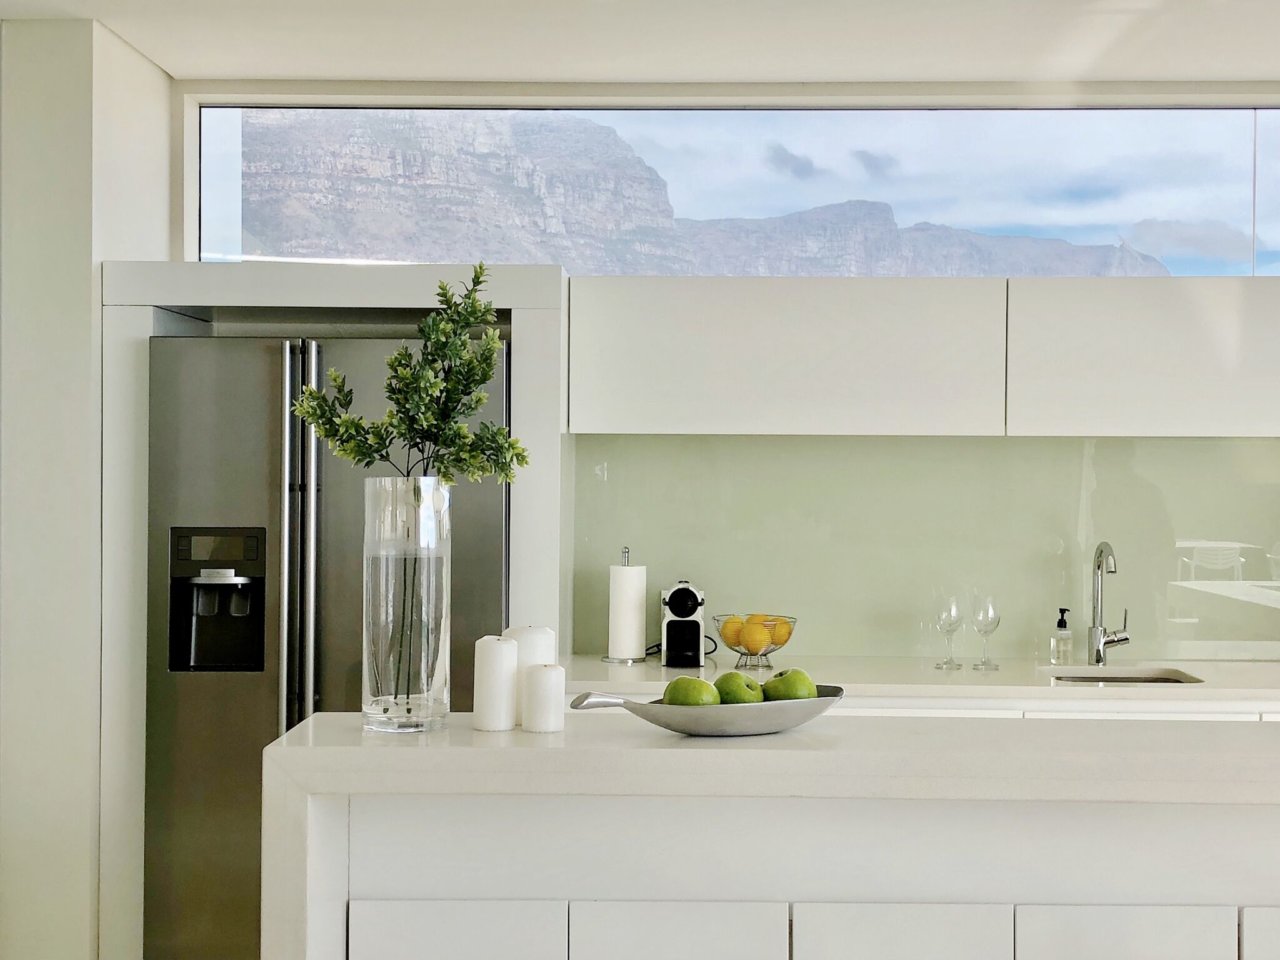 Photo 3 of Aqua Penthouse accommodation in Camps Bay, Cape Town with 2 bedrooms and 2 bathrooms